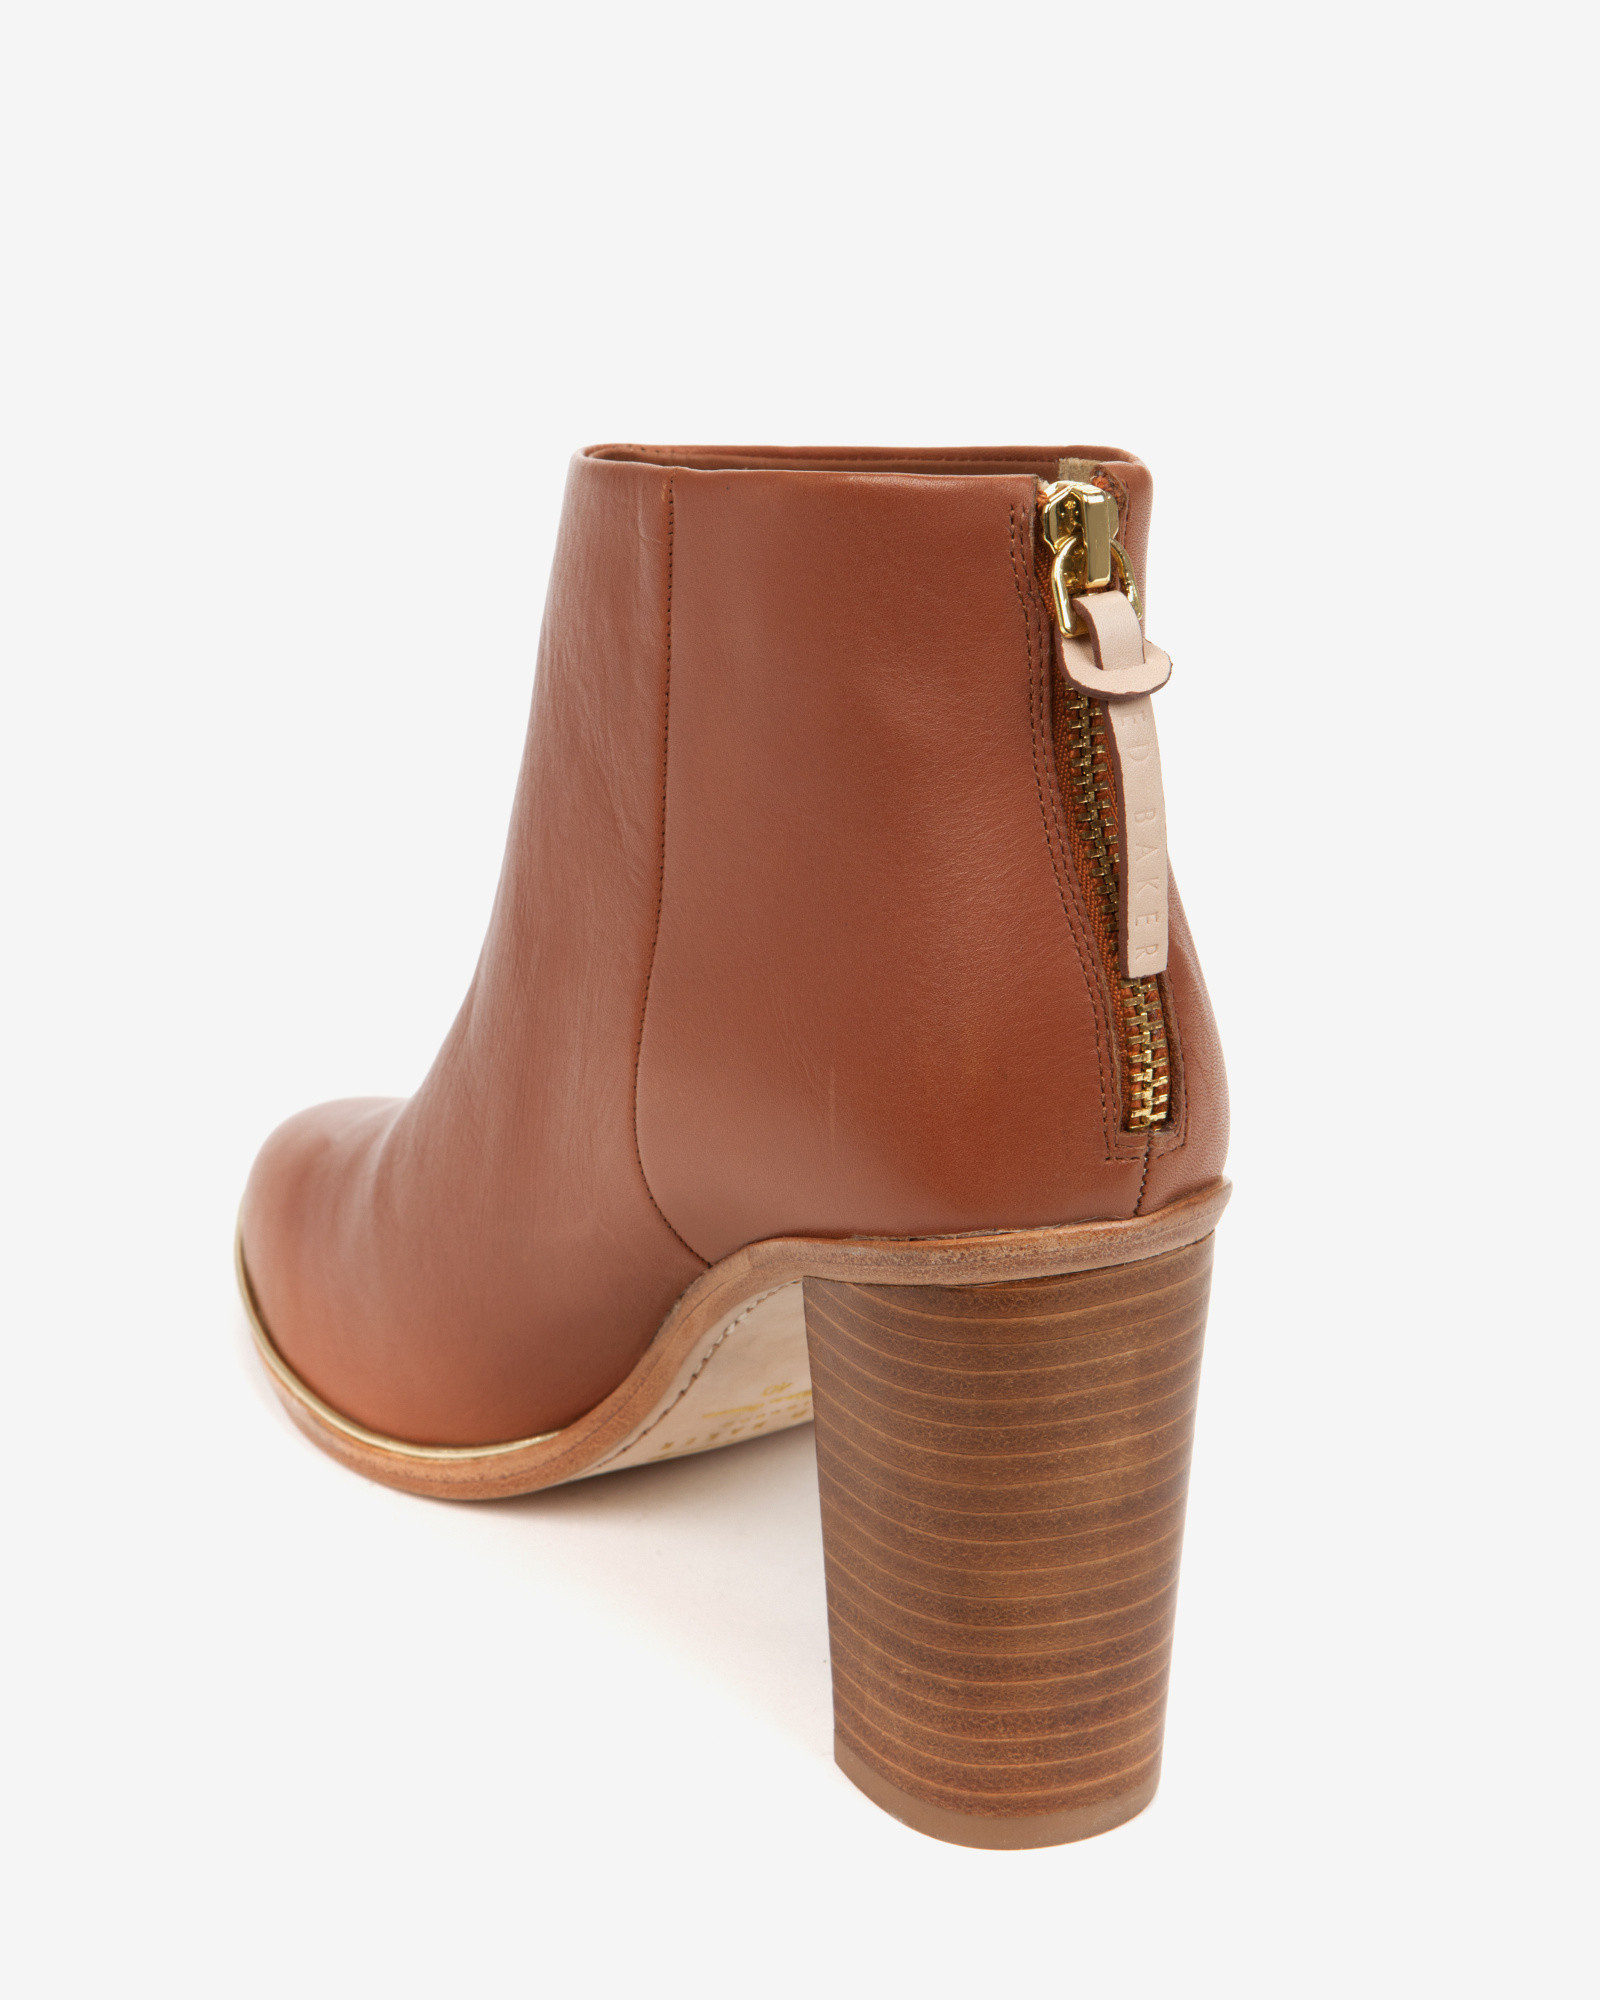 Ted Baker Leather Ankle Boots in Tan (Brown) - Lyst